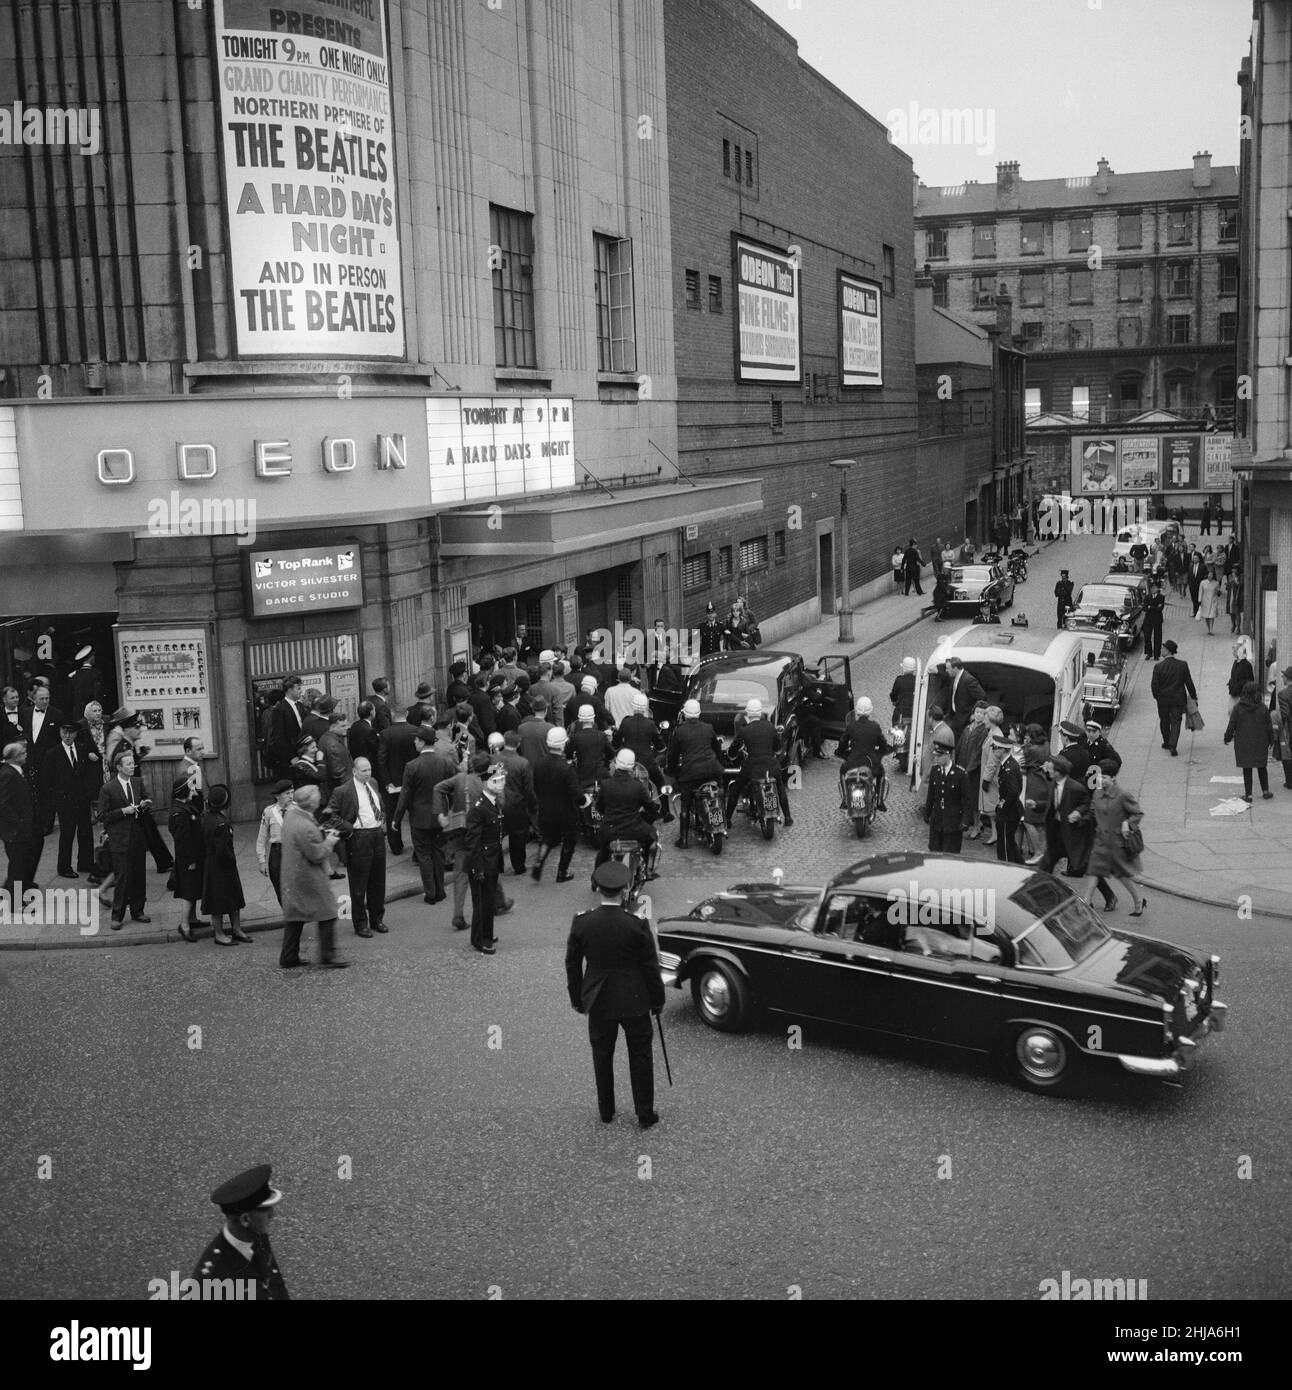 Four days after the world premiere of A Hard Day's Night in London, The Beatles arrived in Liverpool for the northern England premiere 10th July 1964. The Beatles flew to the city and were greeted upon arrival at Speke Airport by 3,000 fans.  The Beatles were driven to Liverpool Town Hall in a police cavalcade, with an estimated 200,000 people lining the route.  Inside the town hall, Lord Mayor Alderman Louis Caplan, gave a speech from the Minstrel's Gallery to the 714 guests present in the ballroom and The Beatles were each presented with a key to the city.  Just before 9pm they left in an Au Stock Photo